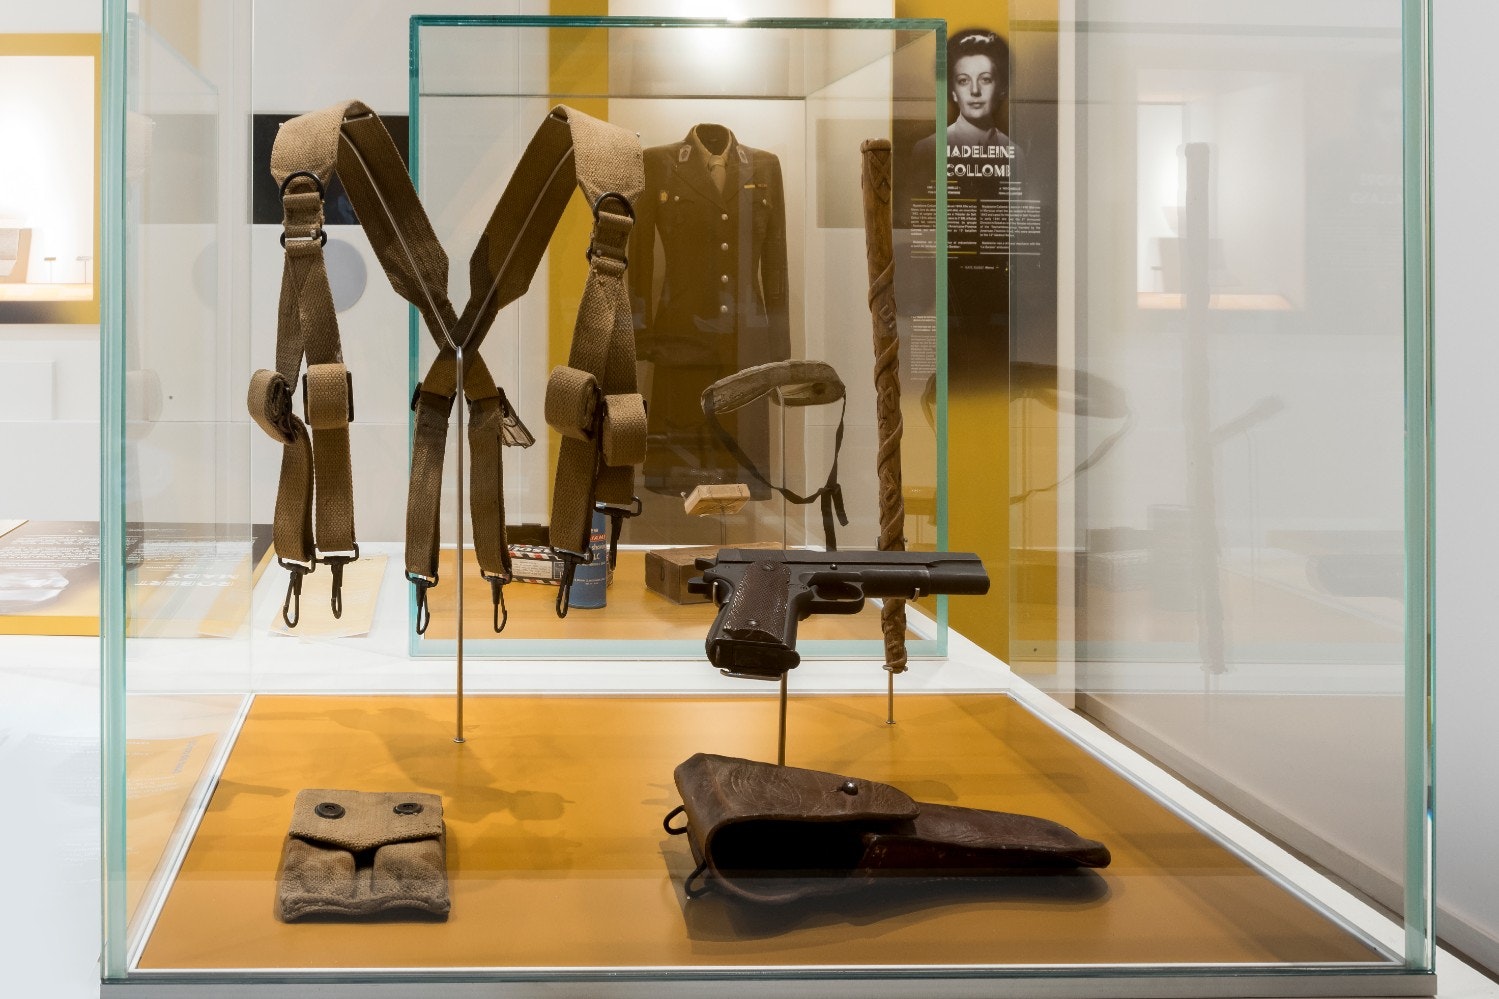 Artefacts at the French Resistance museum in Paris